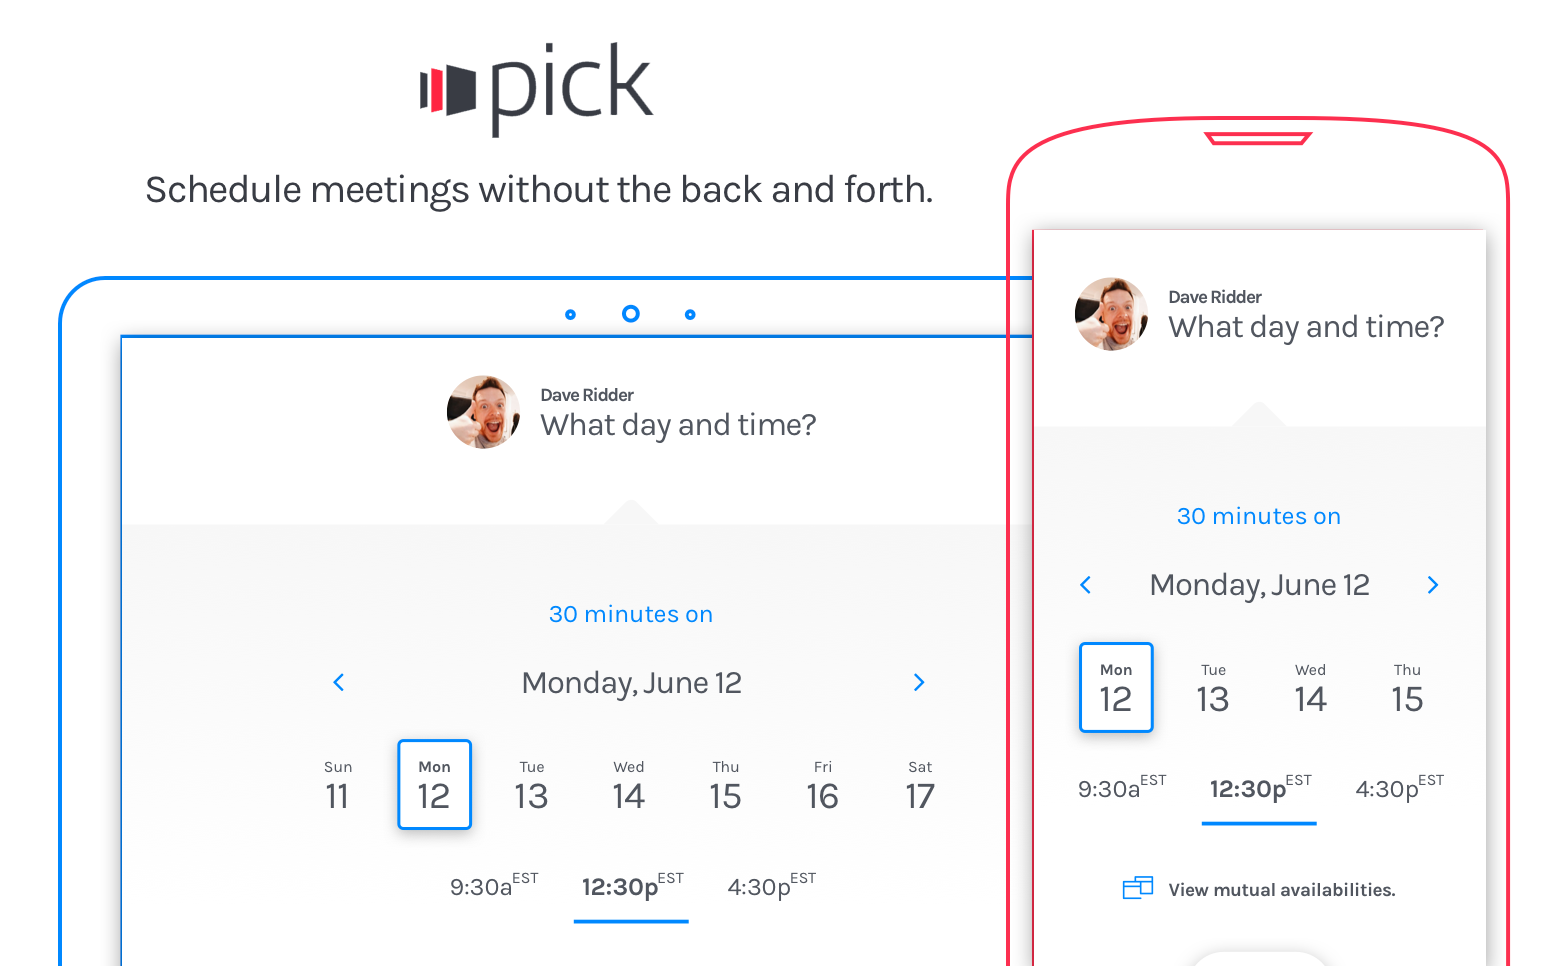 Schedule meetings without the back and forth with Pick